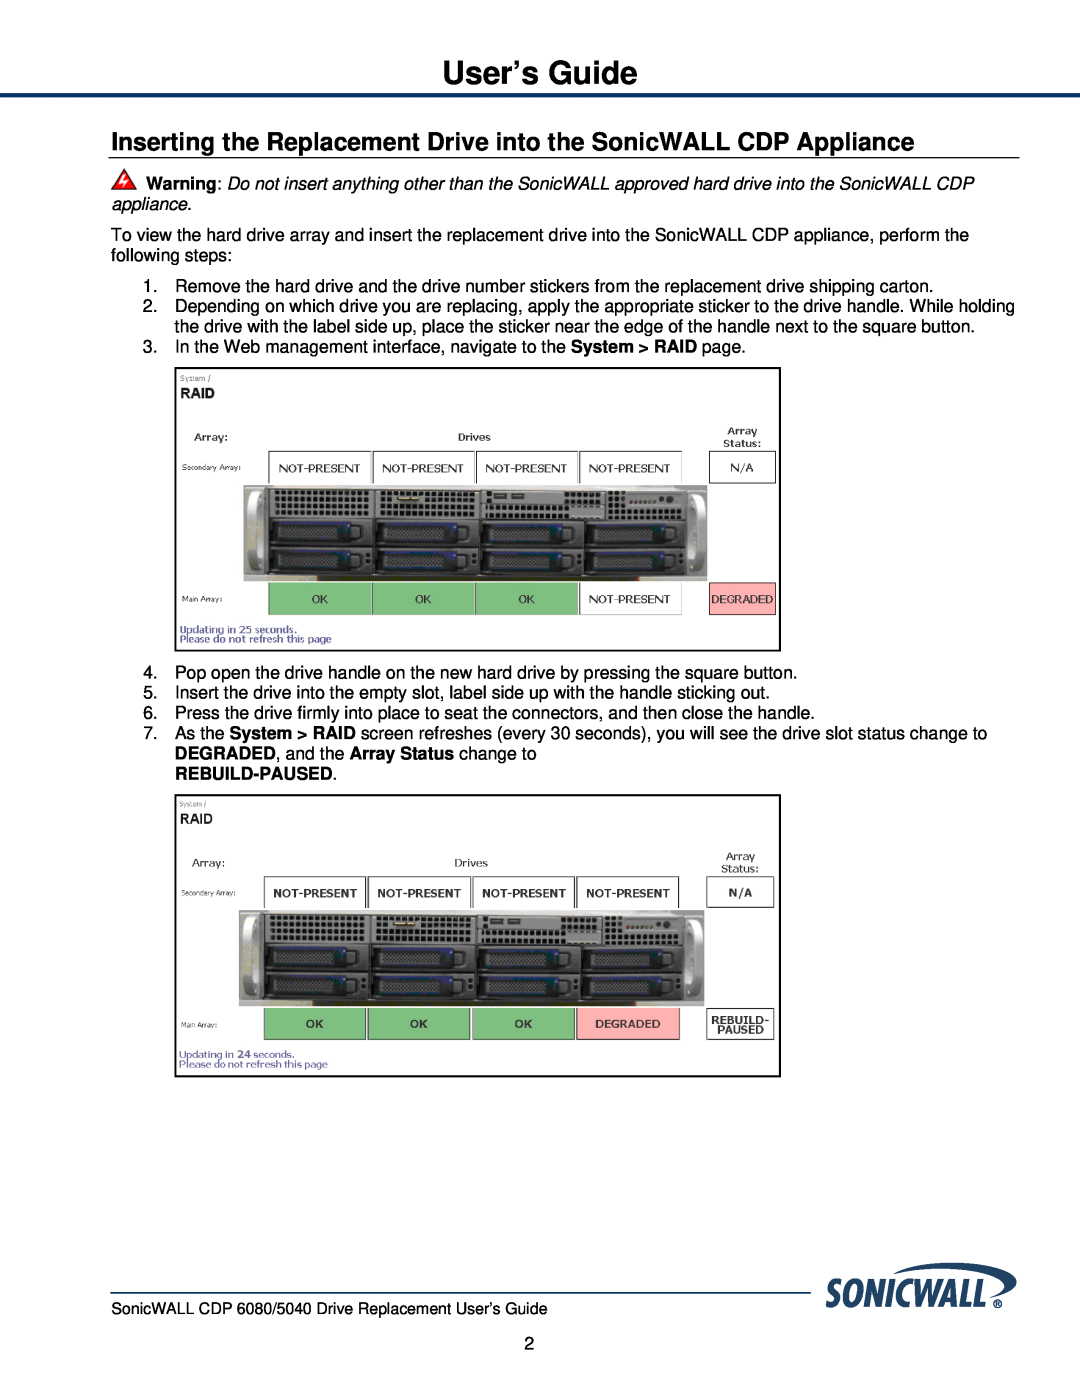 SonicWALL 01-SSC-9310 manual Inserting the Replacement Drive into the SonicWALL CDP Appliance, Rebuild-Paused, User’s Guide 